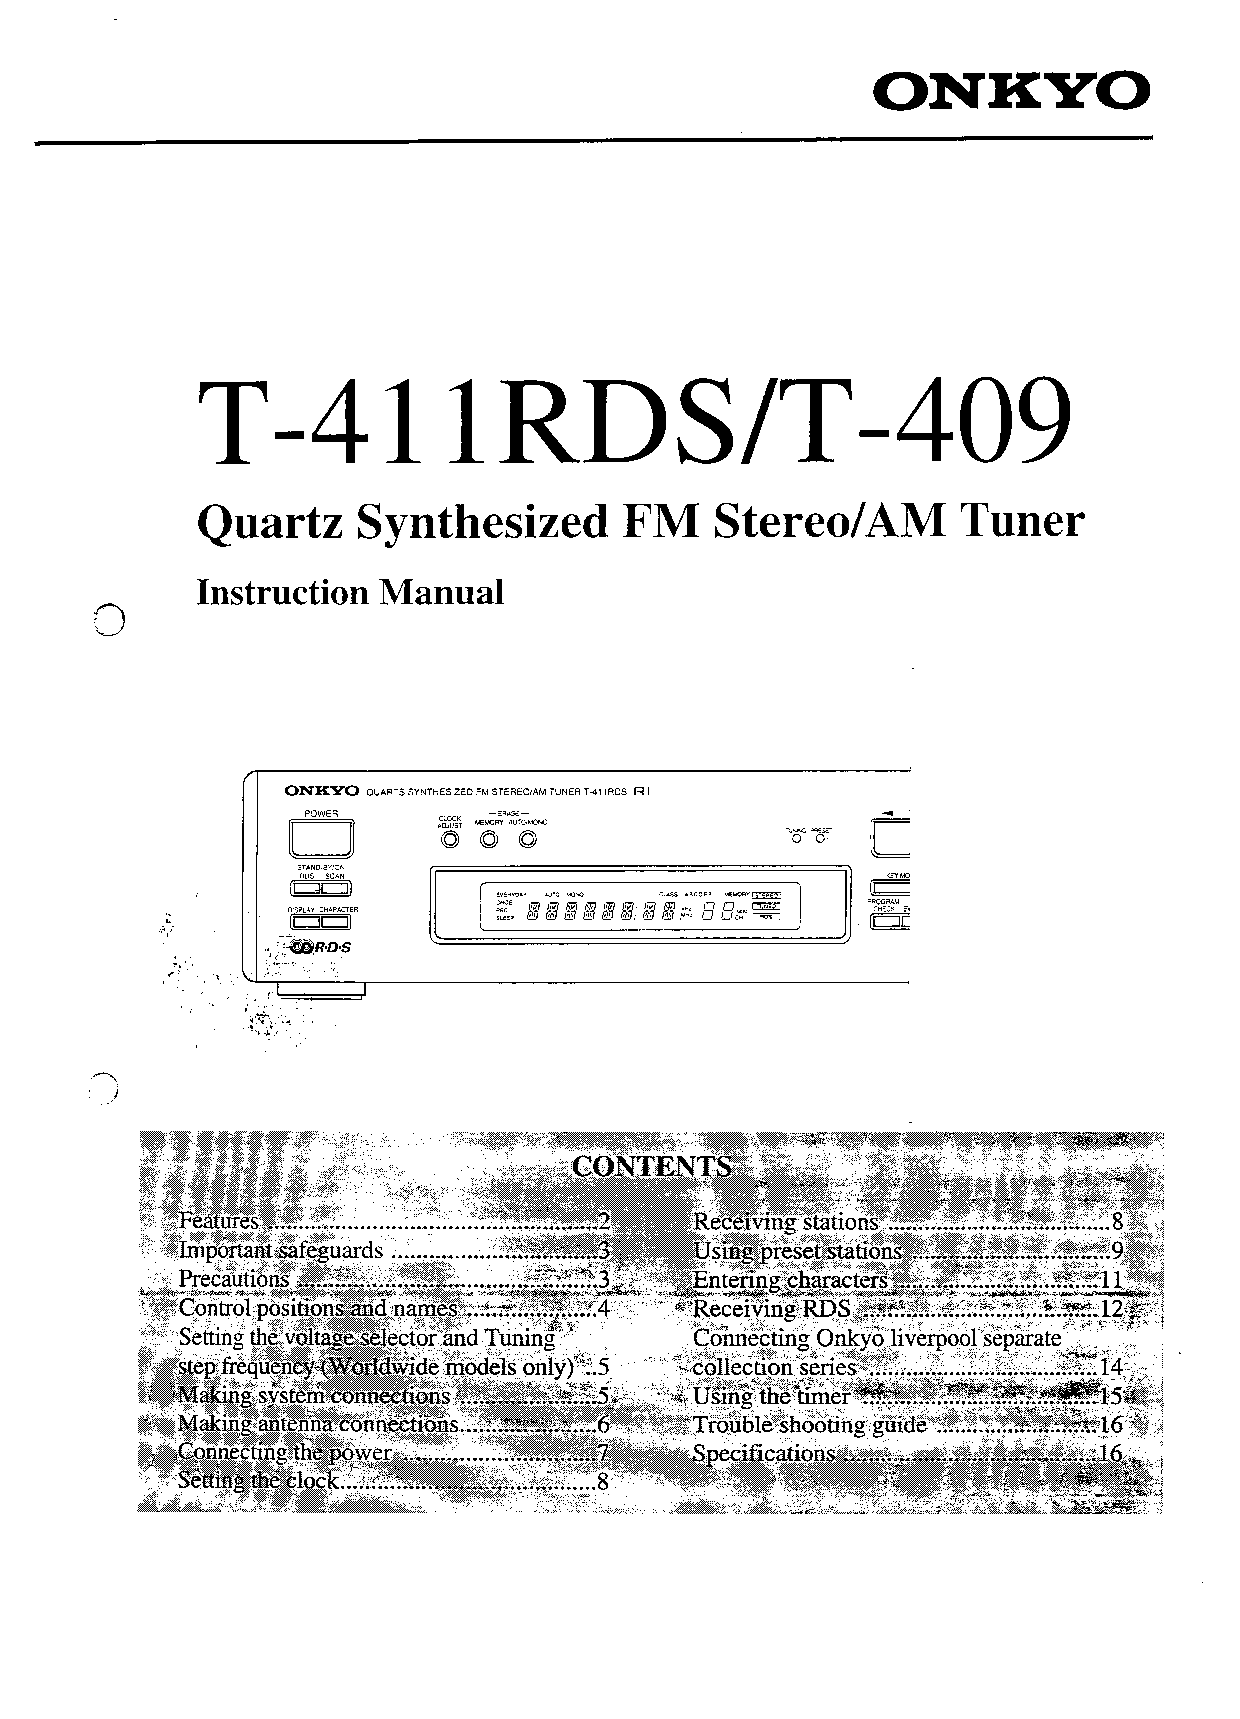 Onkyo T-411RDS, T-409 User Manual